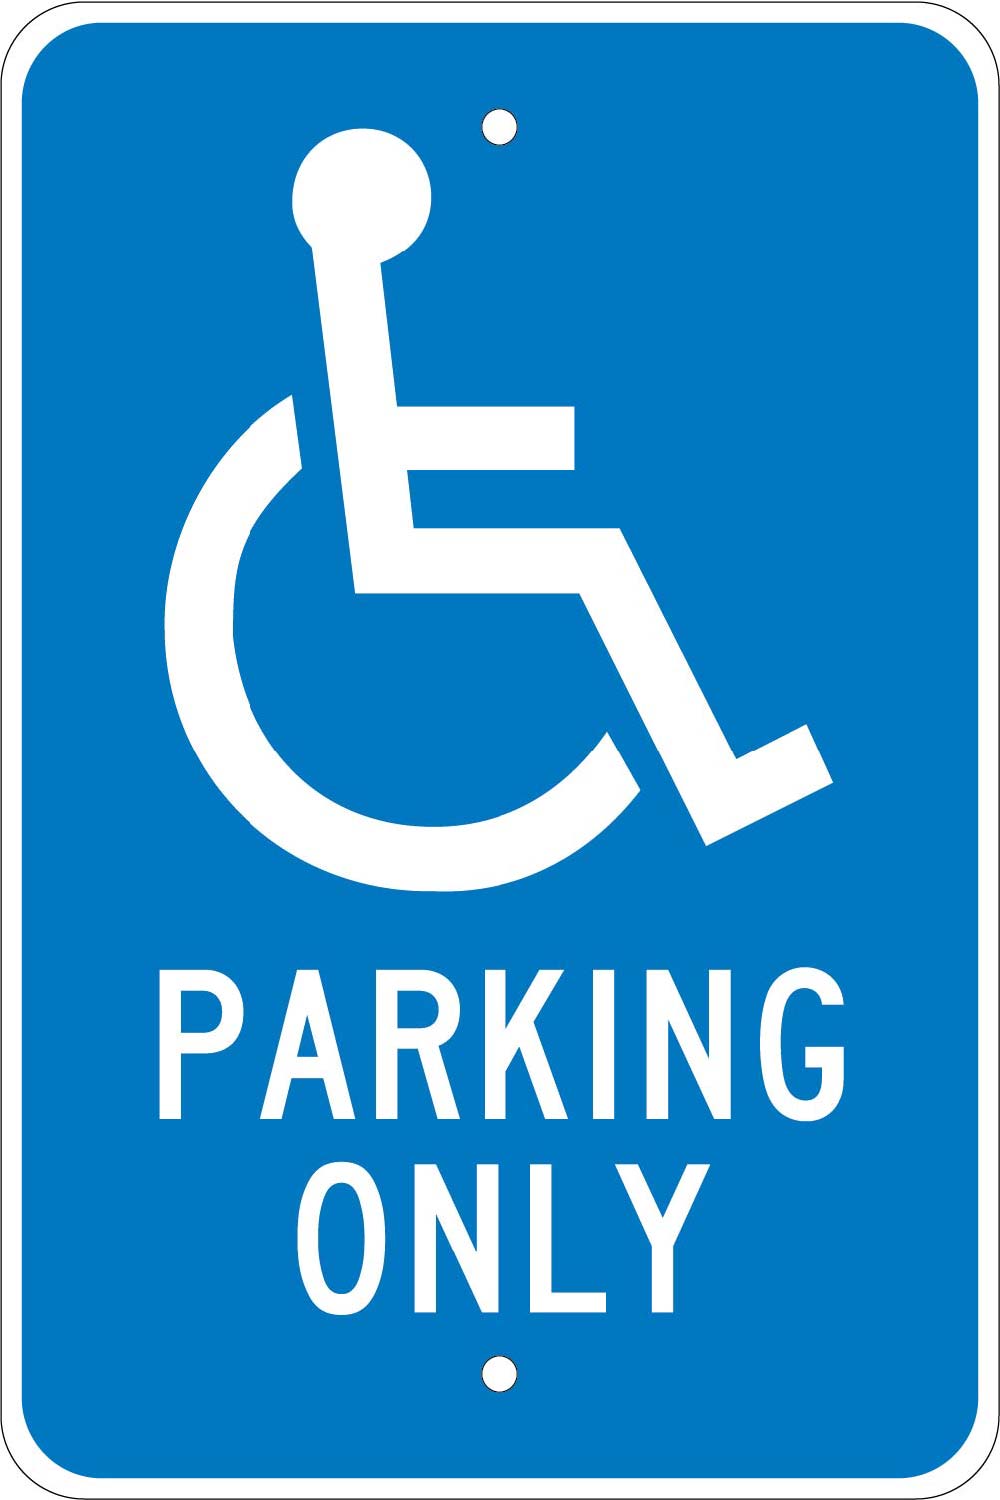 Parking Only Sign-eSafety Supplies, Inc